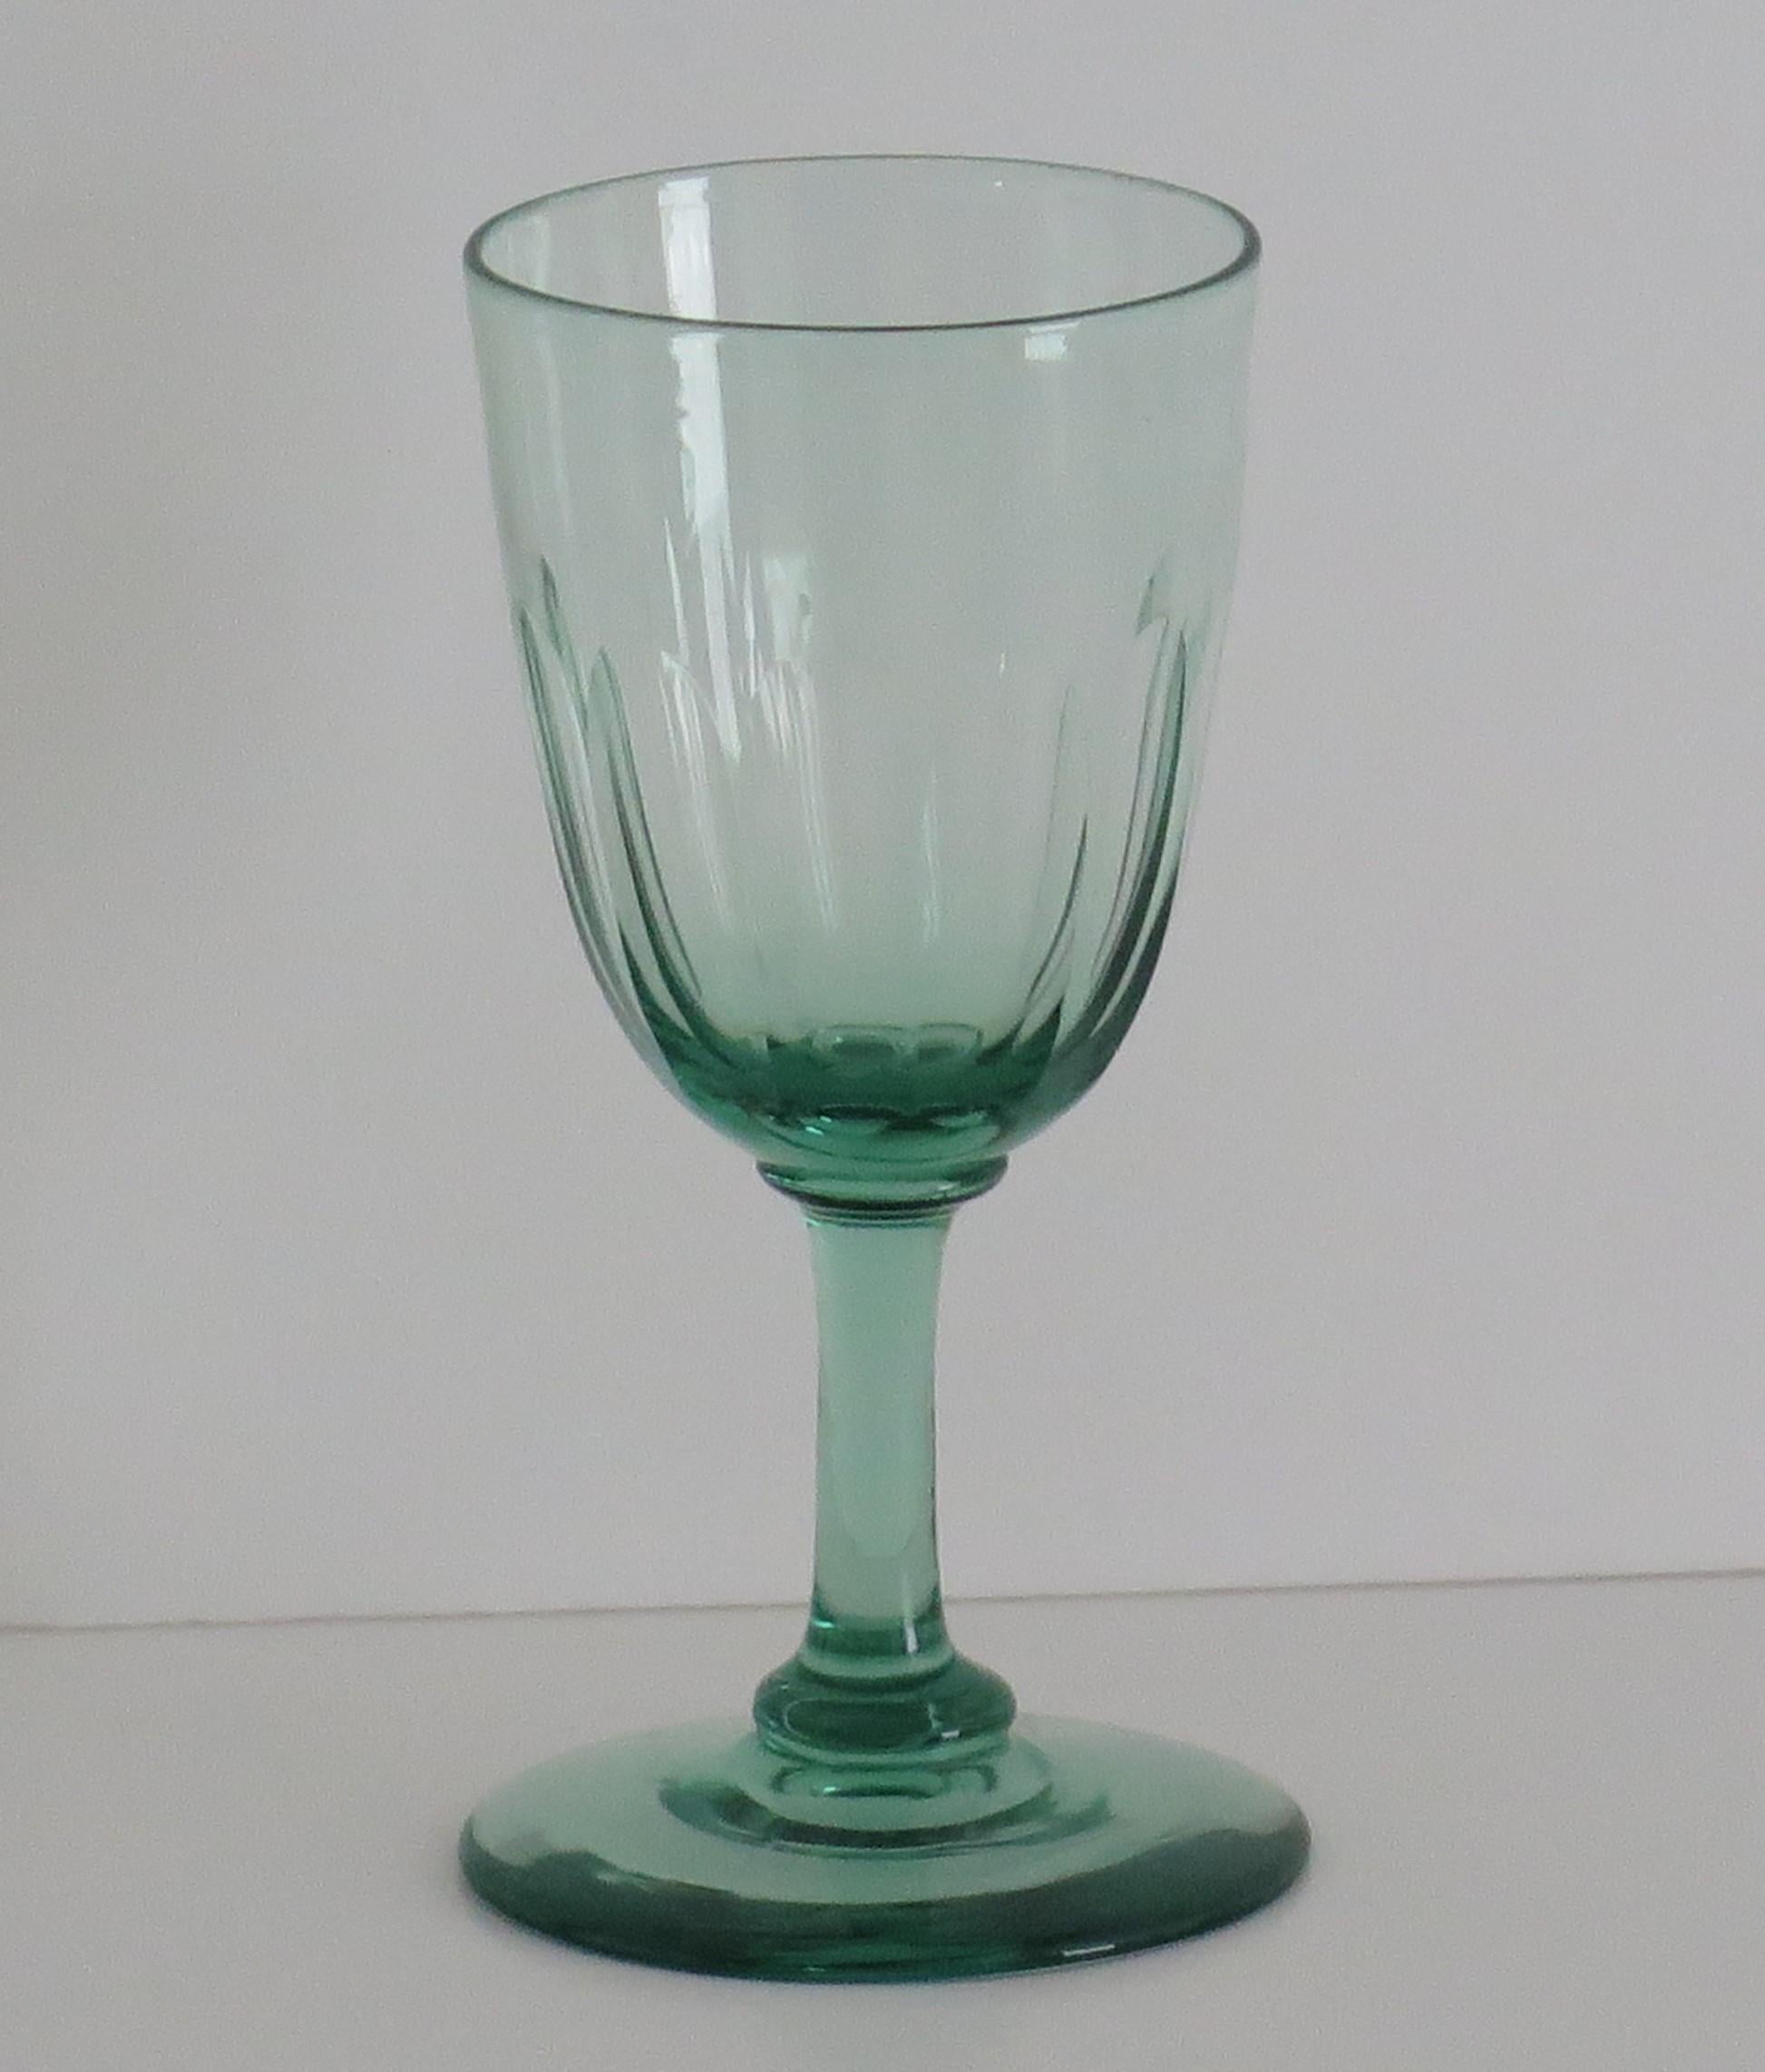 This is a good example of an early Victorian English, hand blown, Light green wine drinking glass, with a panel cut bowl dating to circa 1840.

This glass has a round funnel bowl over a solid stem, which sits on a flattened basal knop on a plain